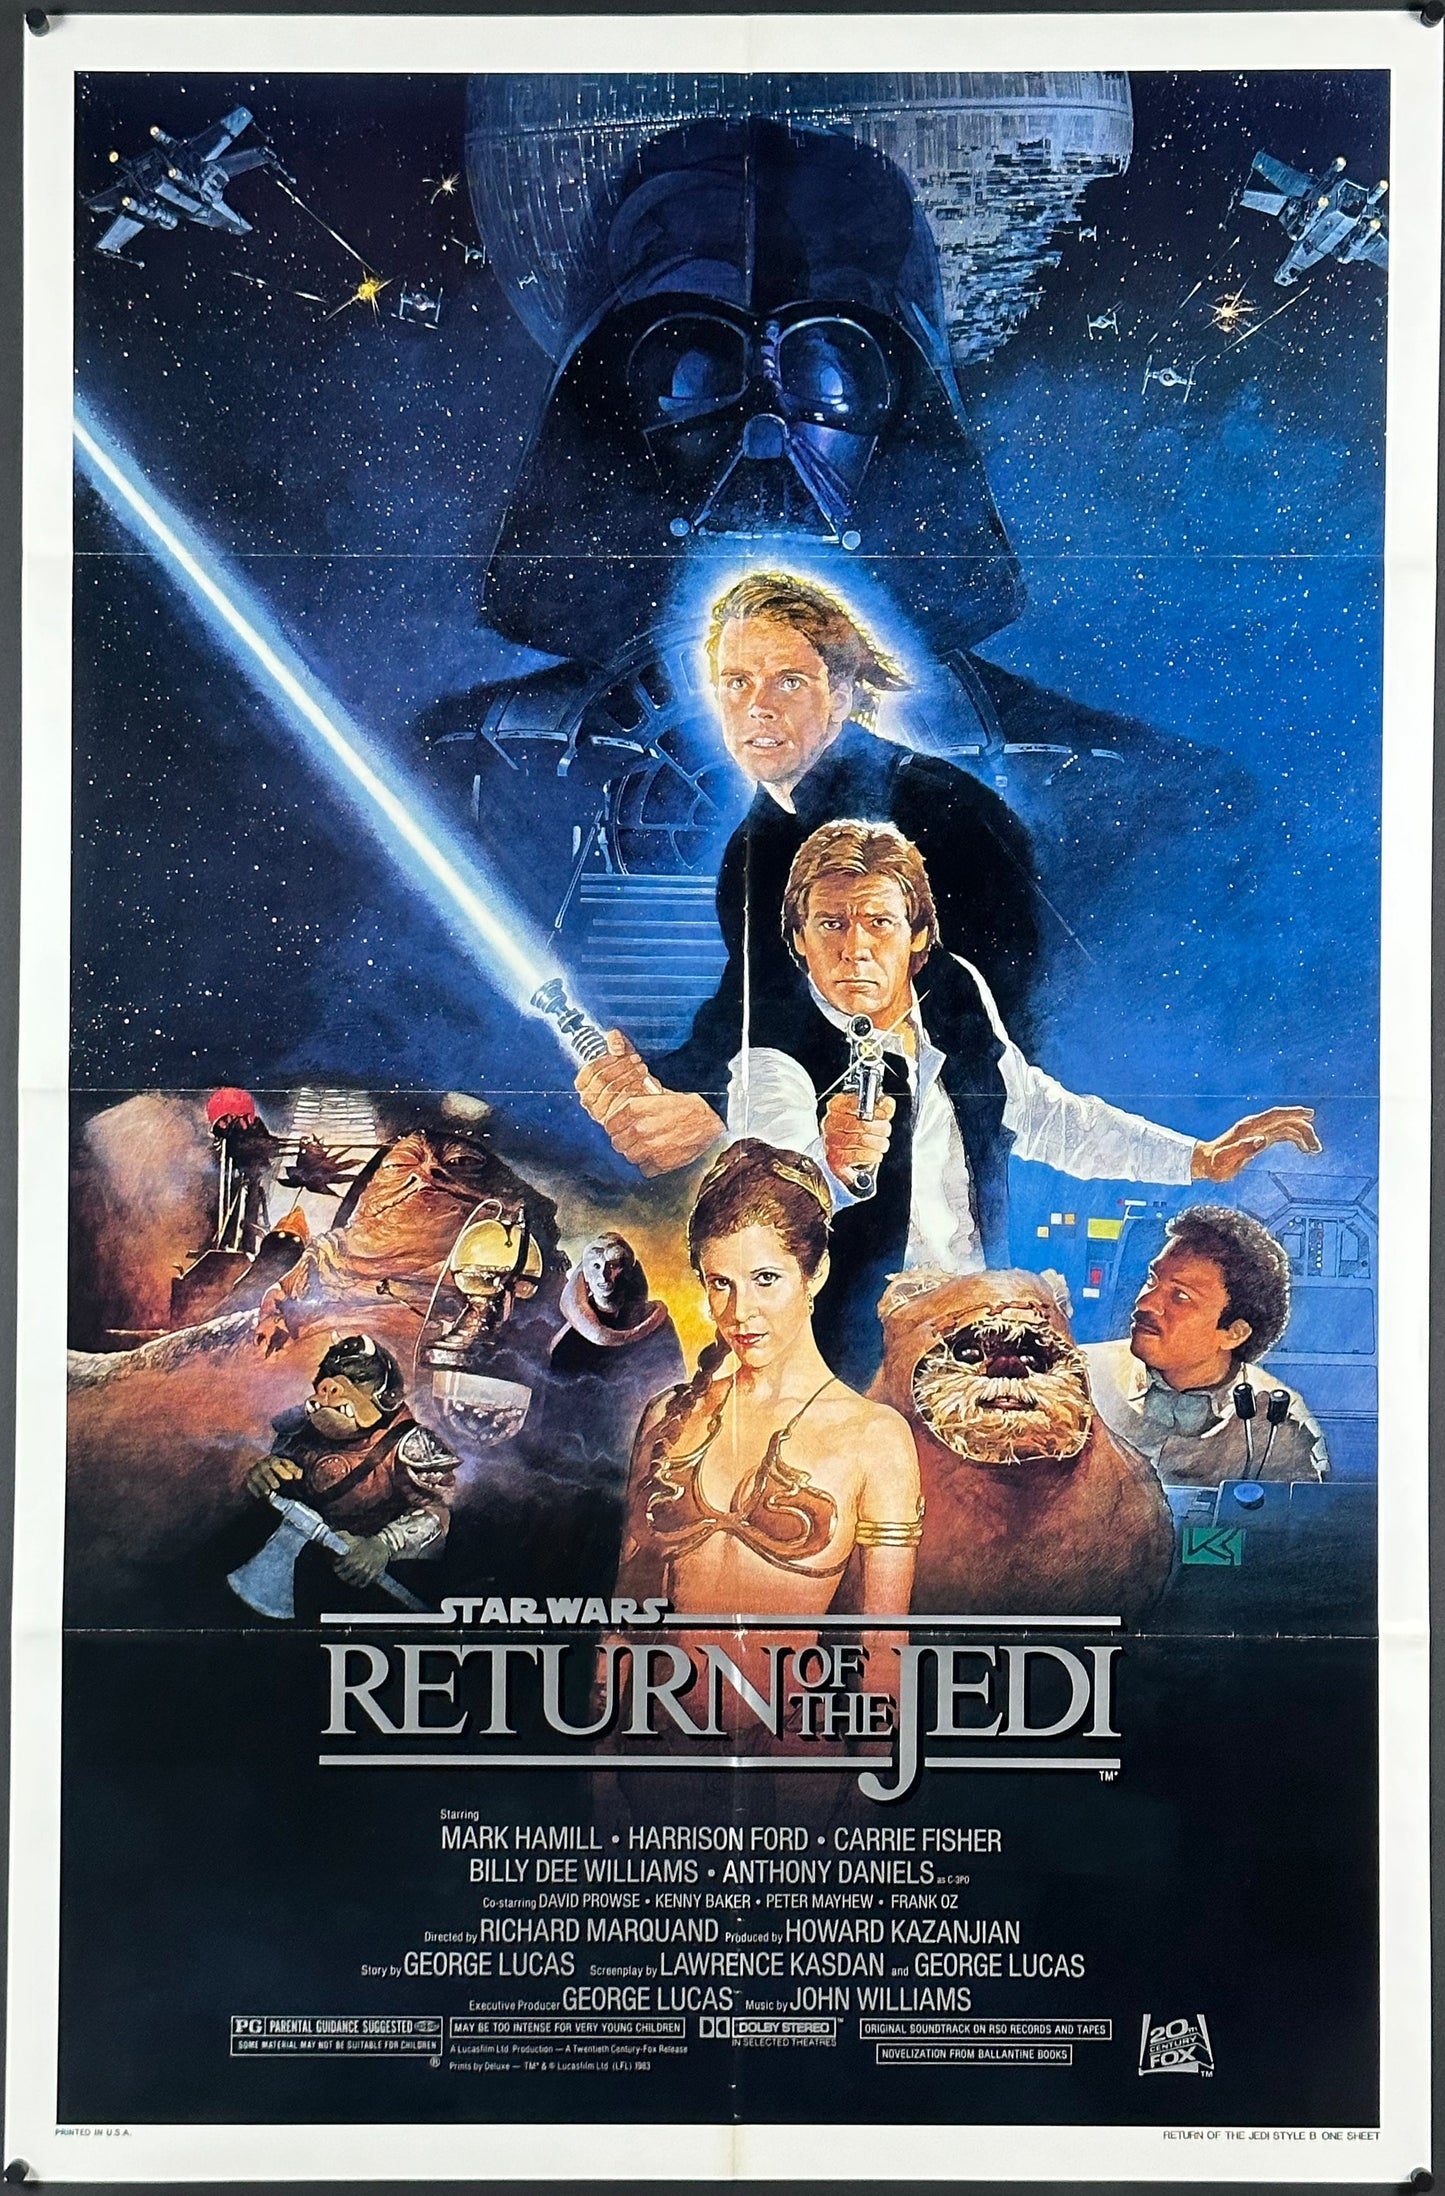 Star Wars: Episode VI - Return of the Jedi US One Sheet Style B "Studio Style" (1983) - ORIGINAL RELEASE - posterpalace.com